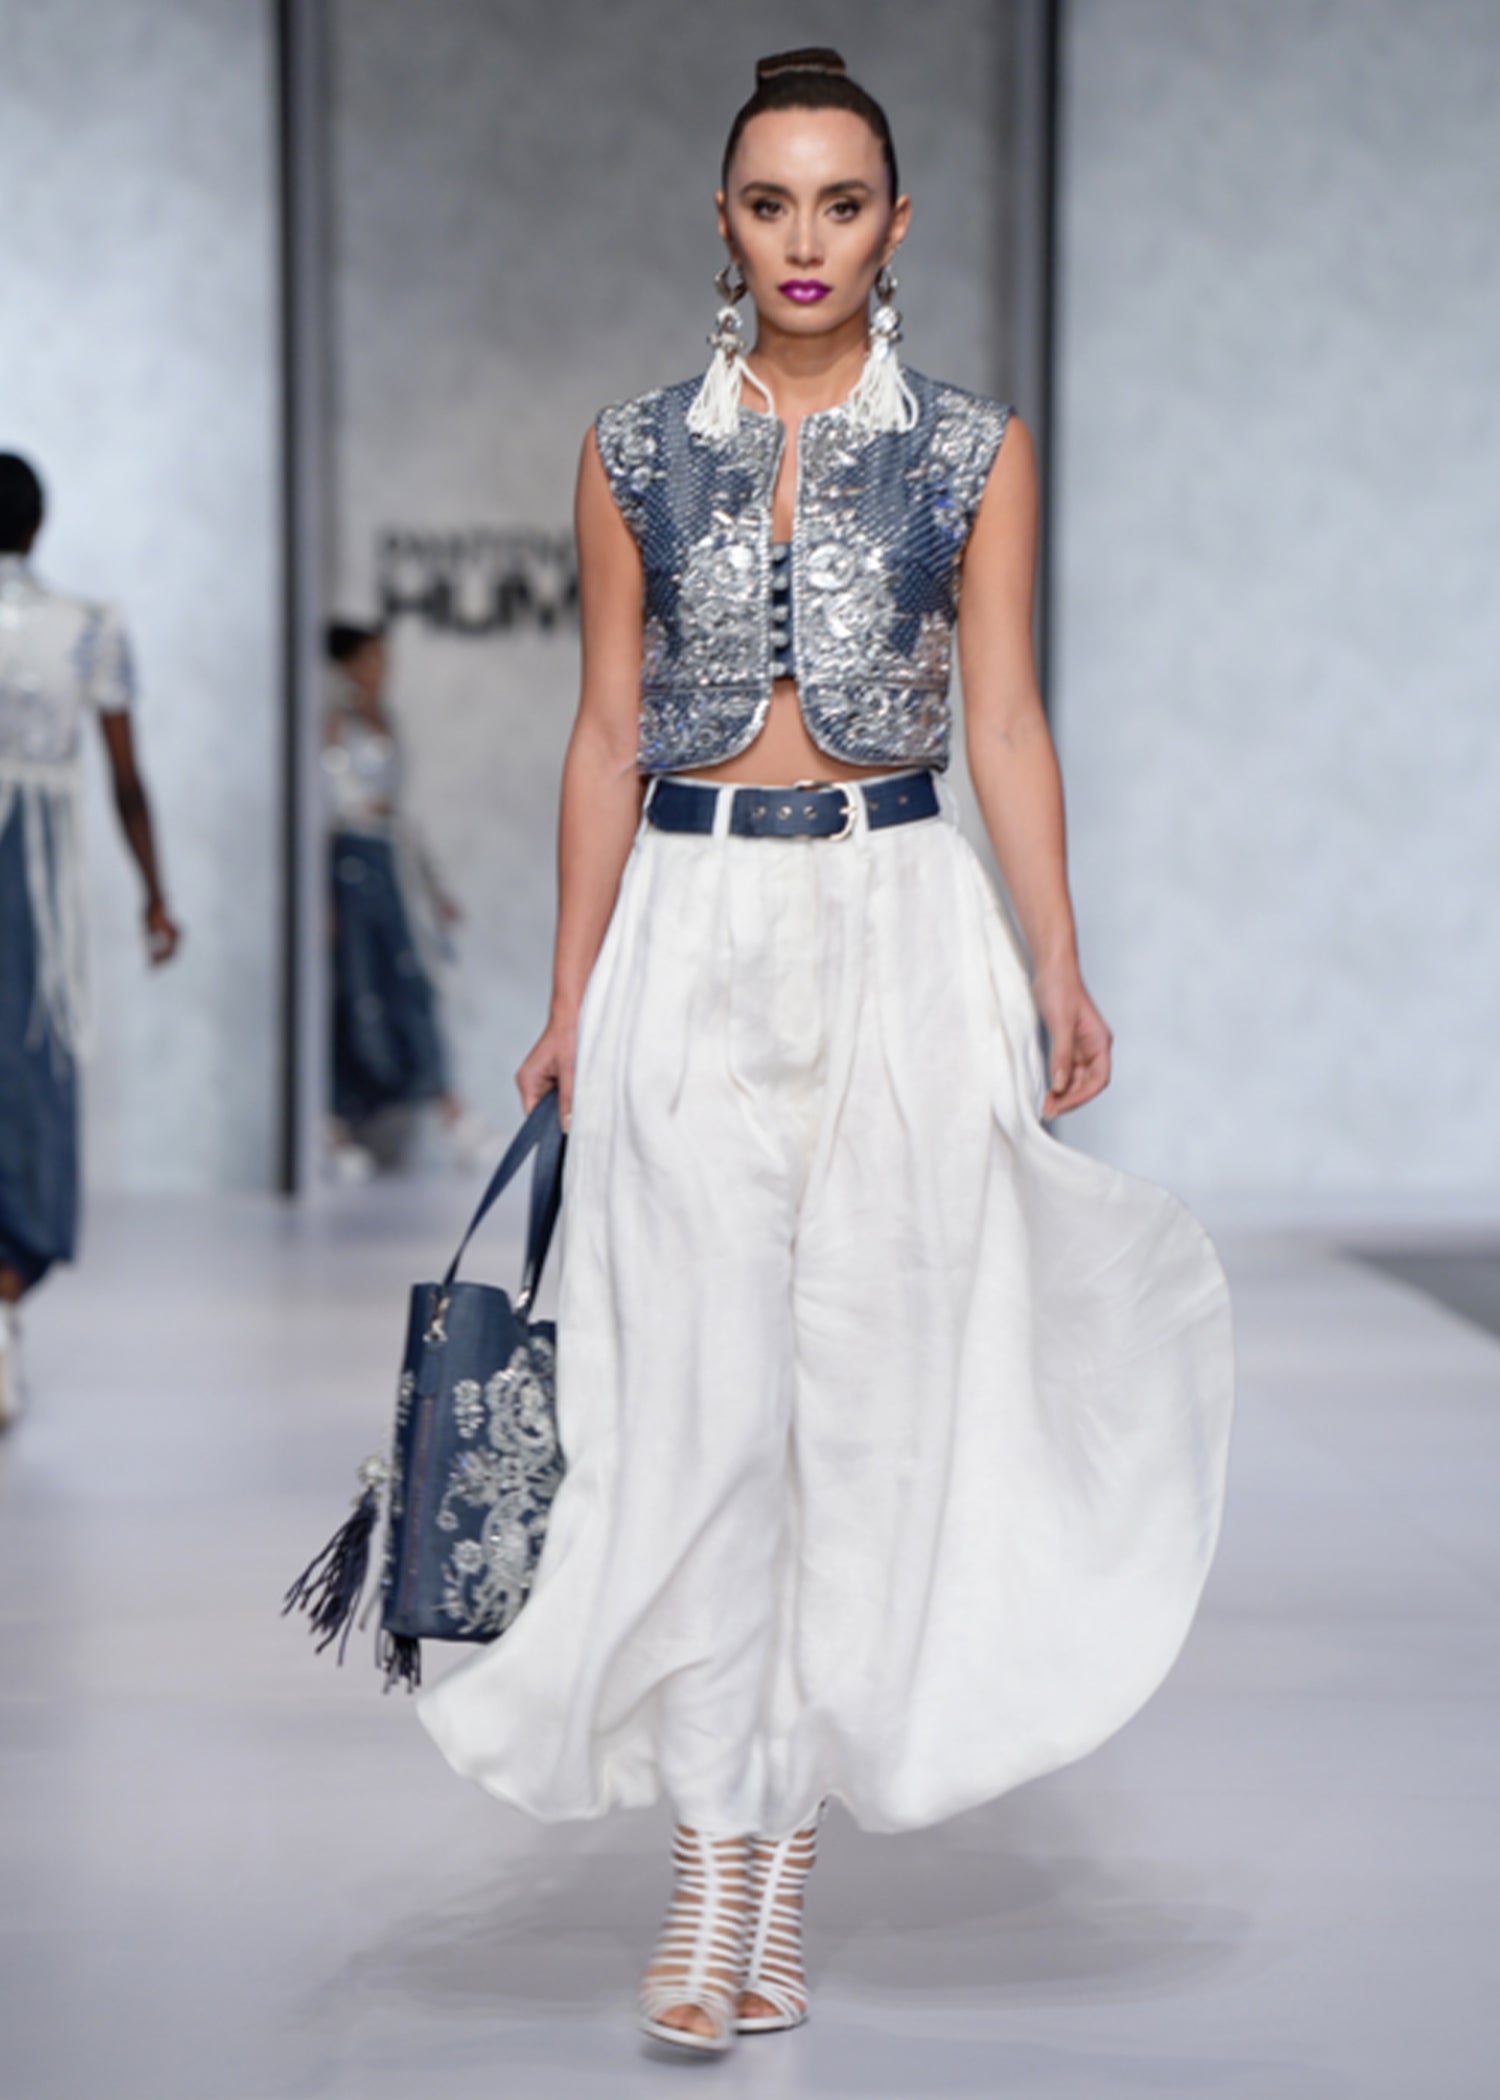 Crop Top with Silver Embellishments and Layered Trouser Skirt